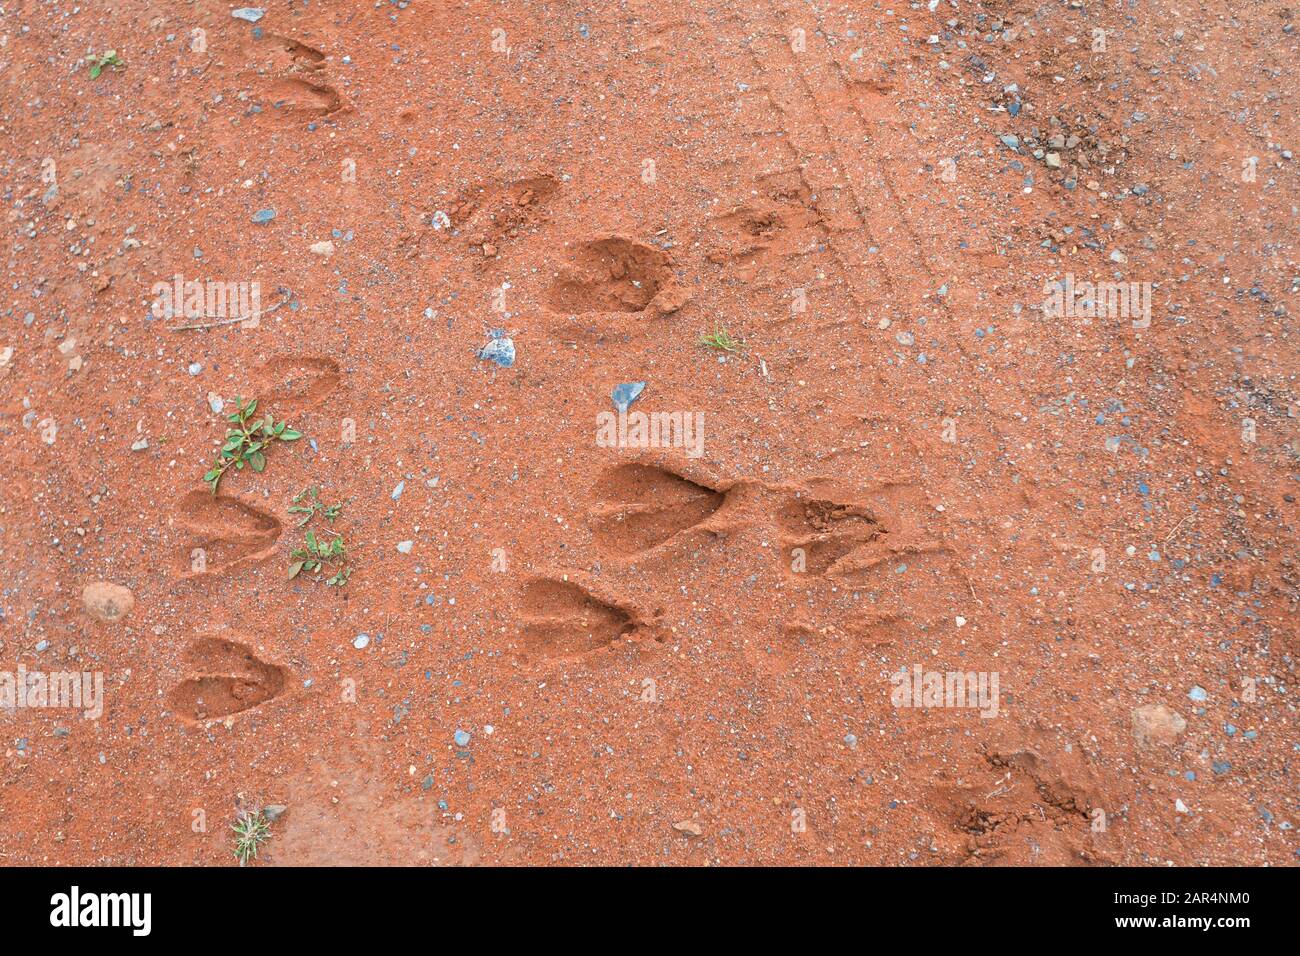 footprints of an Impala antelope animal in the red earth, soil, ground at Mokala national park, South Africa concept abstract nature Stock Photo